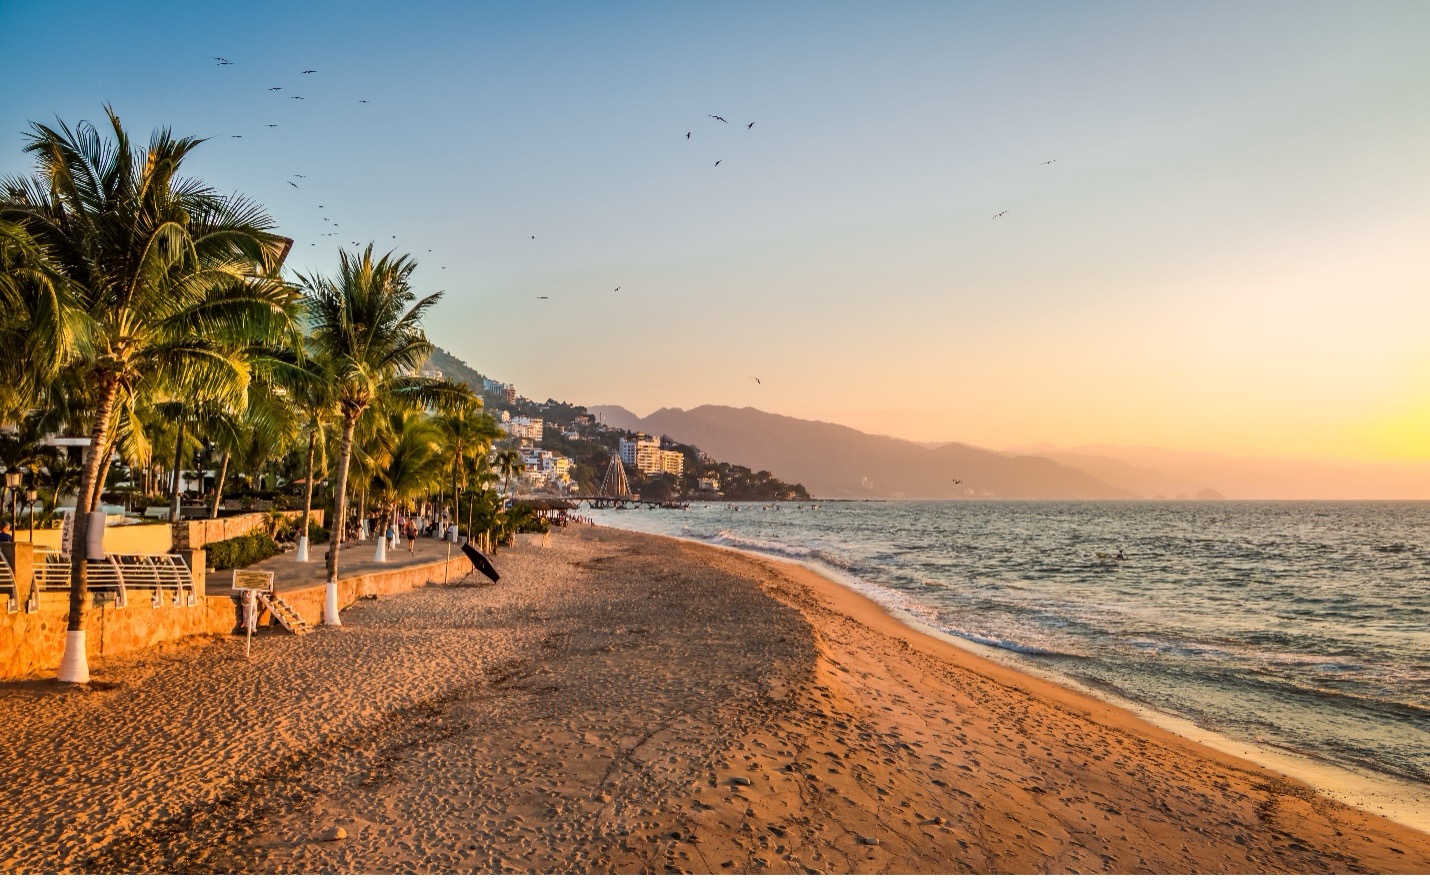 Vacation Home Buyers Are Heading to Mexico